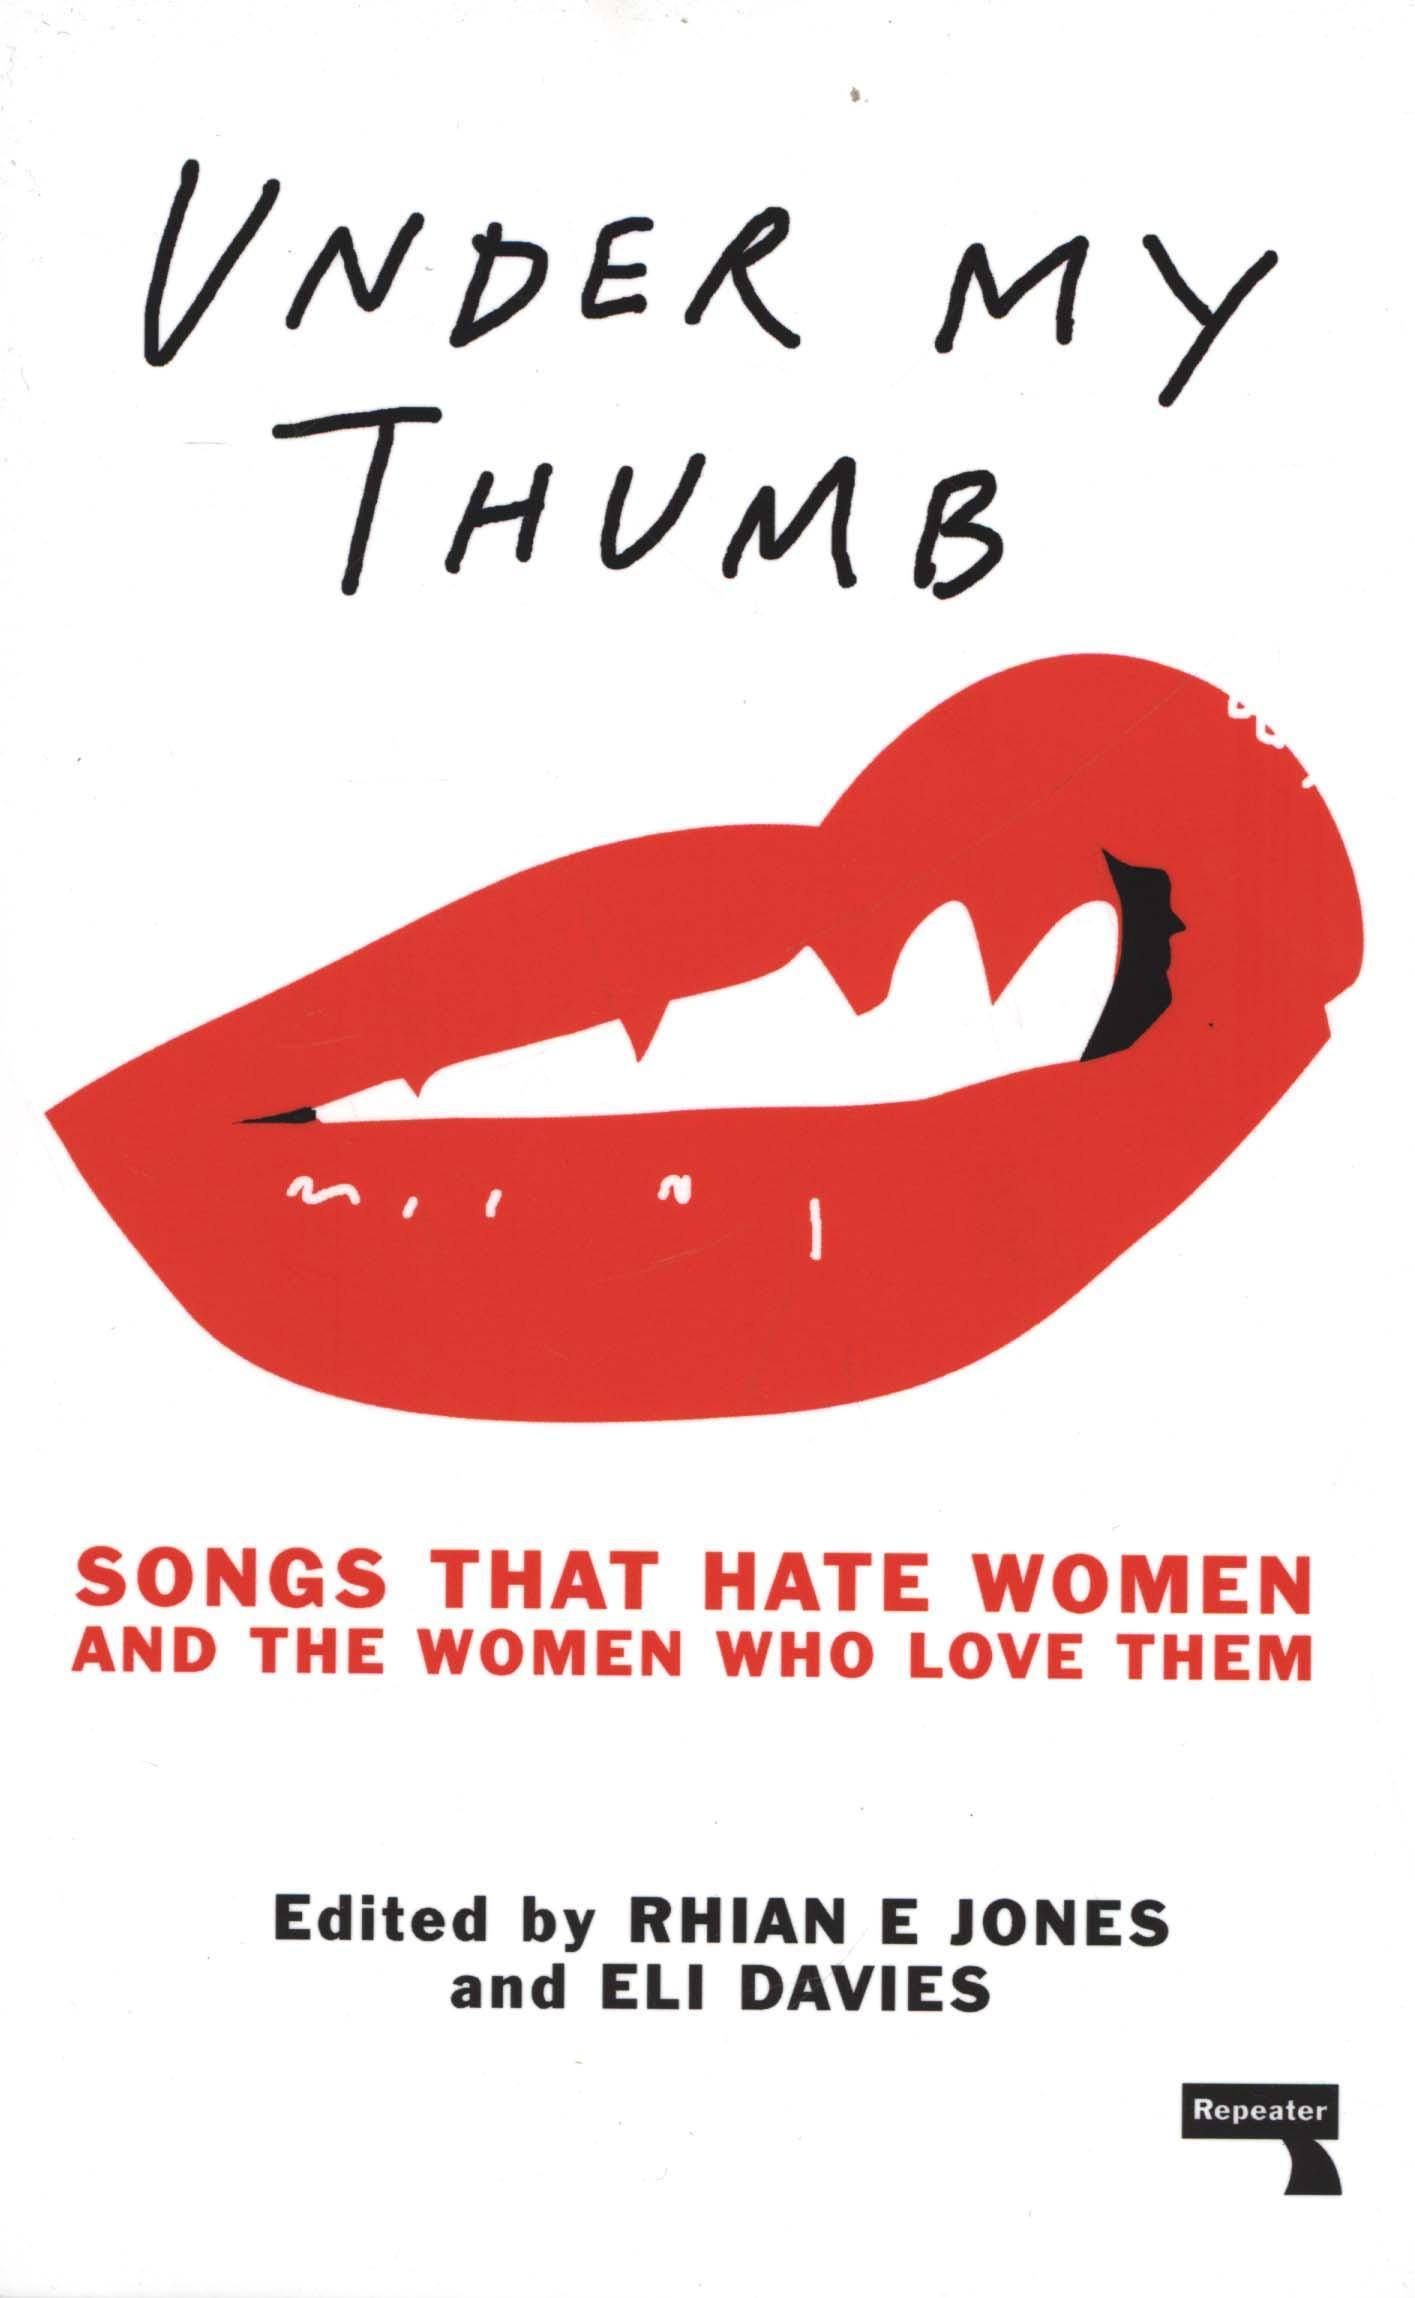 Under My Thumb: Songs that hate women and the women who love